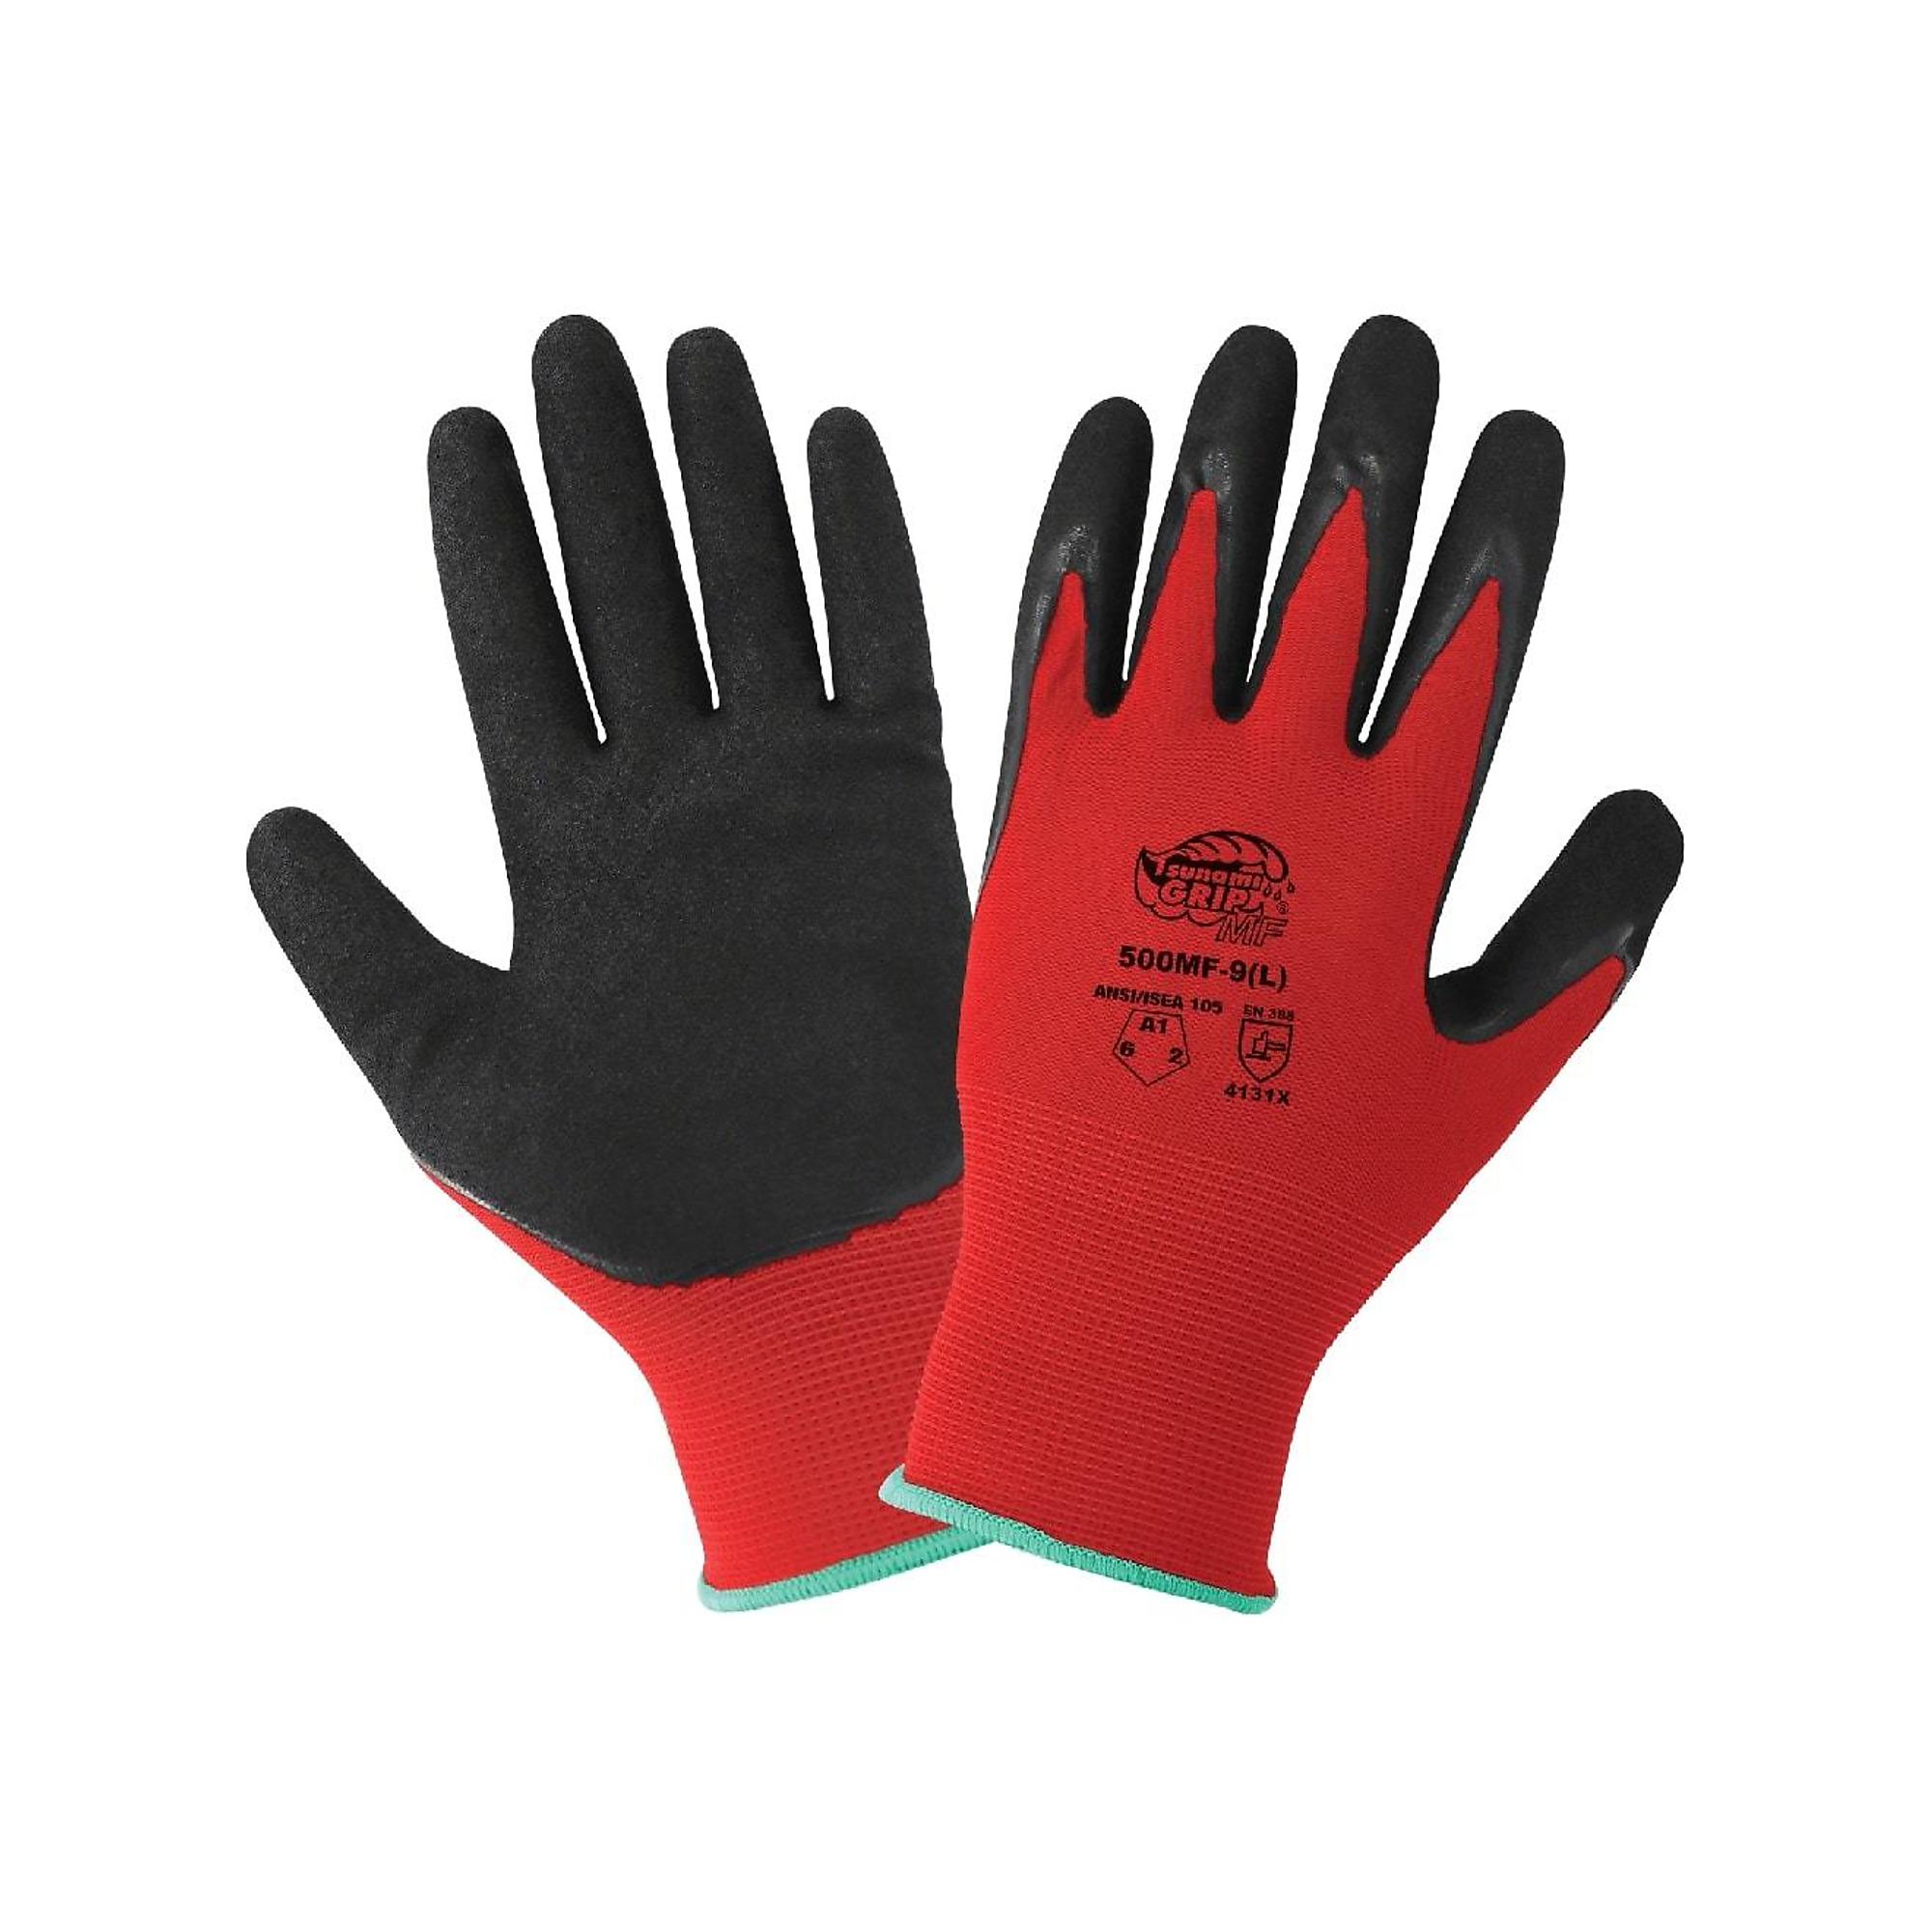 Global Glove Tsunami Grip , Red, Black Double Nitrile Coat, Cut Resist A1 Gloves-12 Pair, Size M, Color Red/Black, Included (qty.) 12 Model 500MF-8(M)